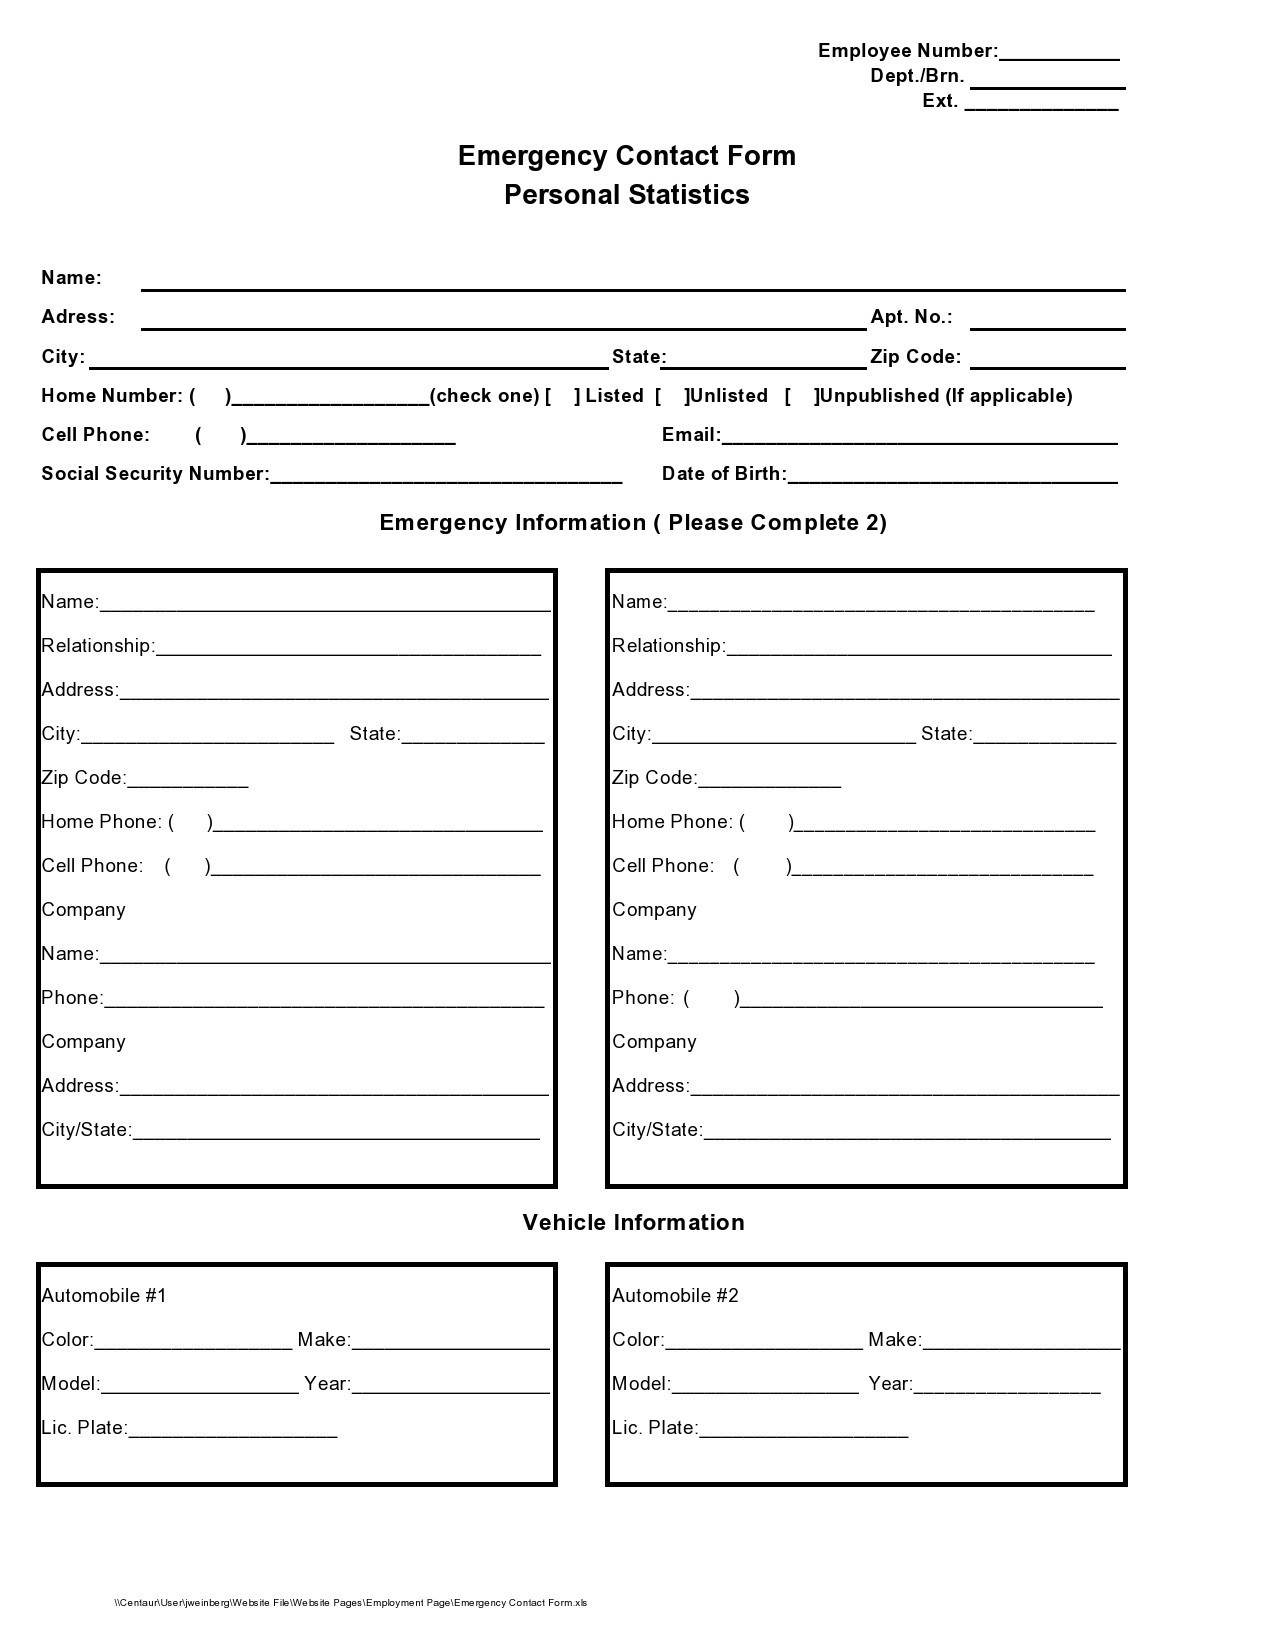 Free emergency contact form 24